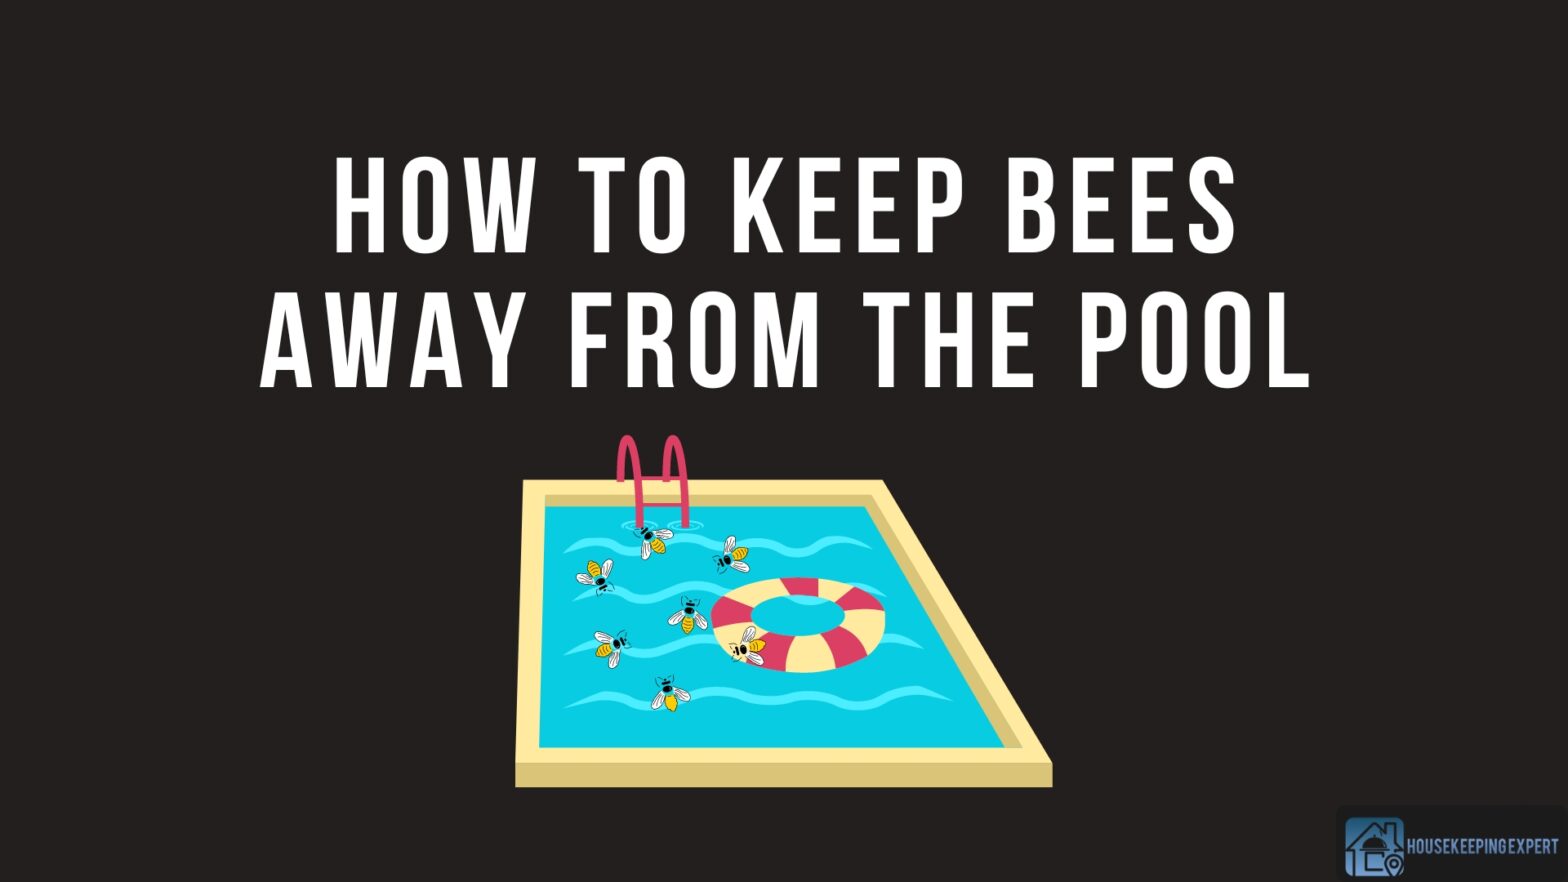 How To Keep Bees Away From The Pool